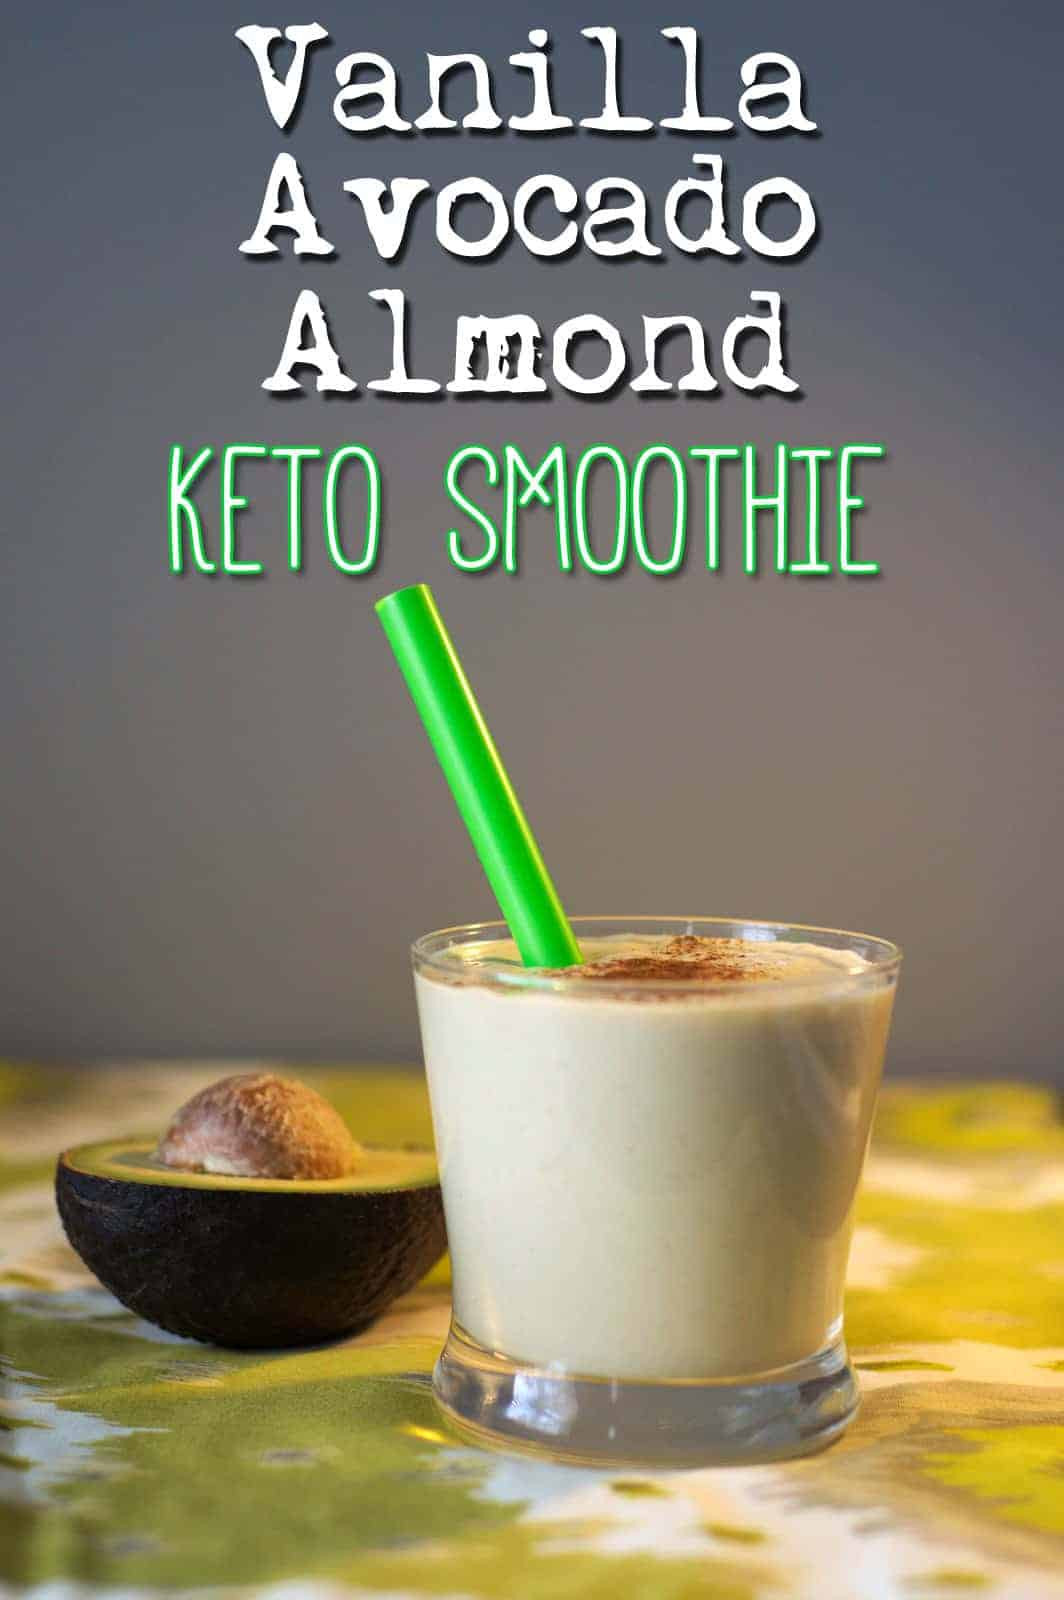 Low Carb Shake Recipes
 50 Best Low Carb Smoothie Recipes for 2018